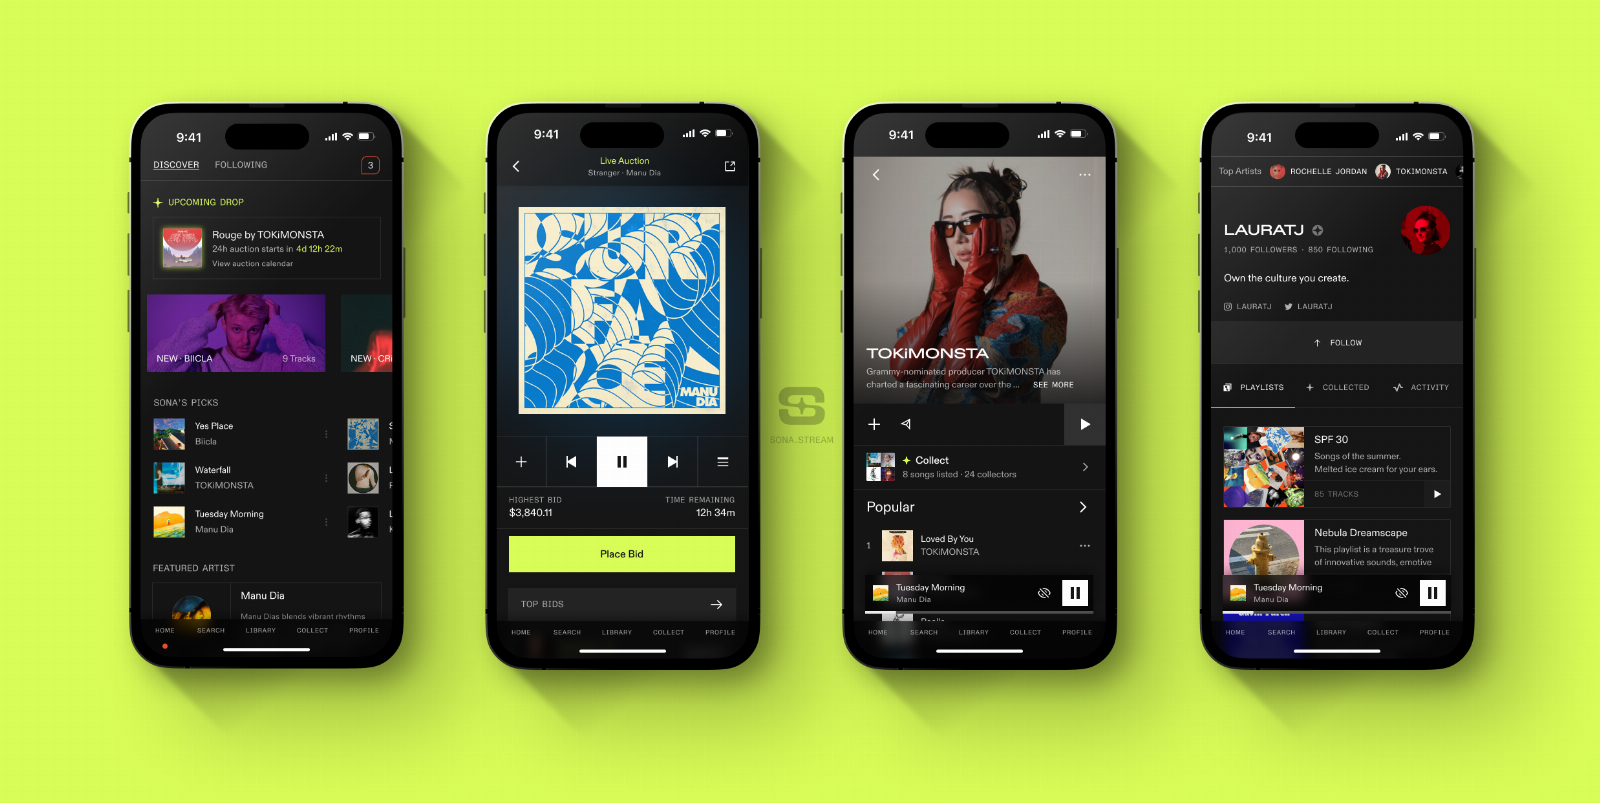 Sona launches its music streaming platform and marketplace to reward fans for buying ‘digital twins’ of songs